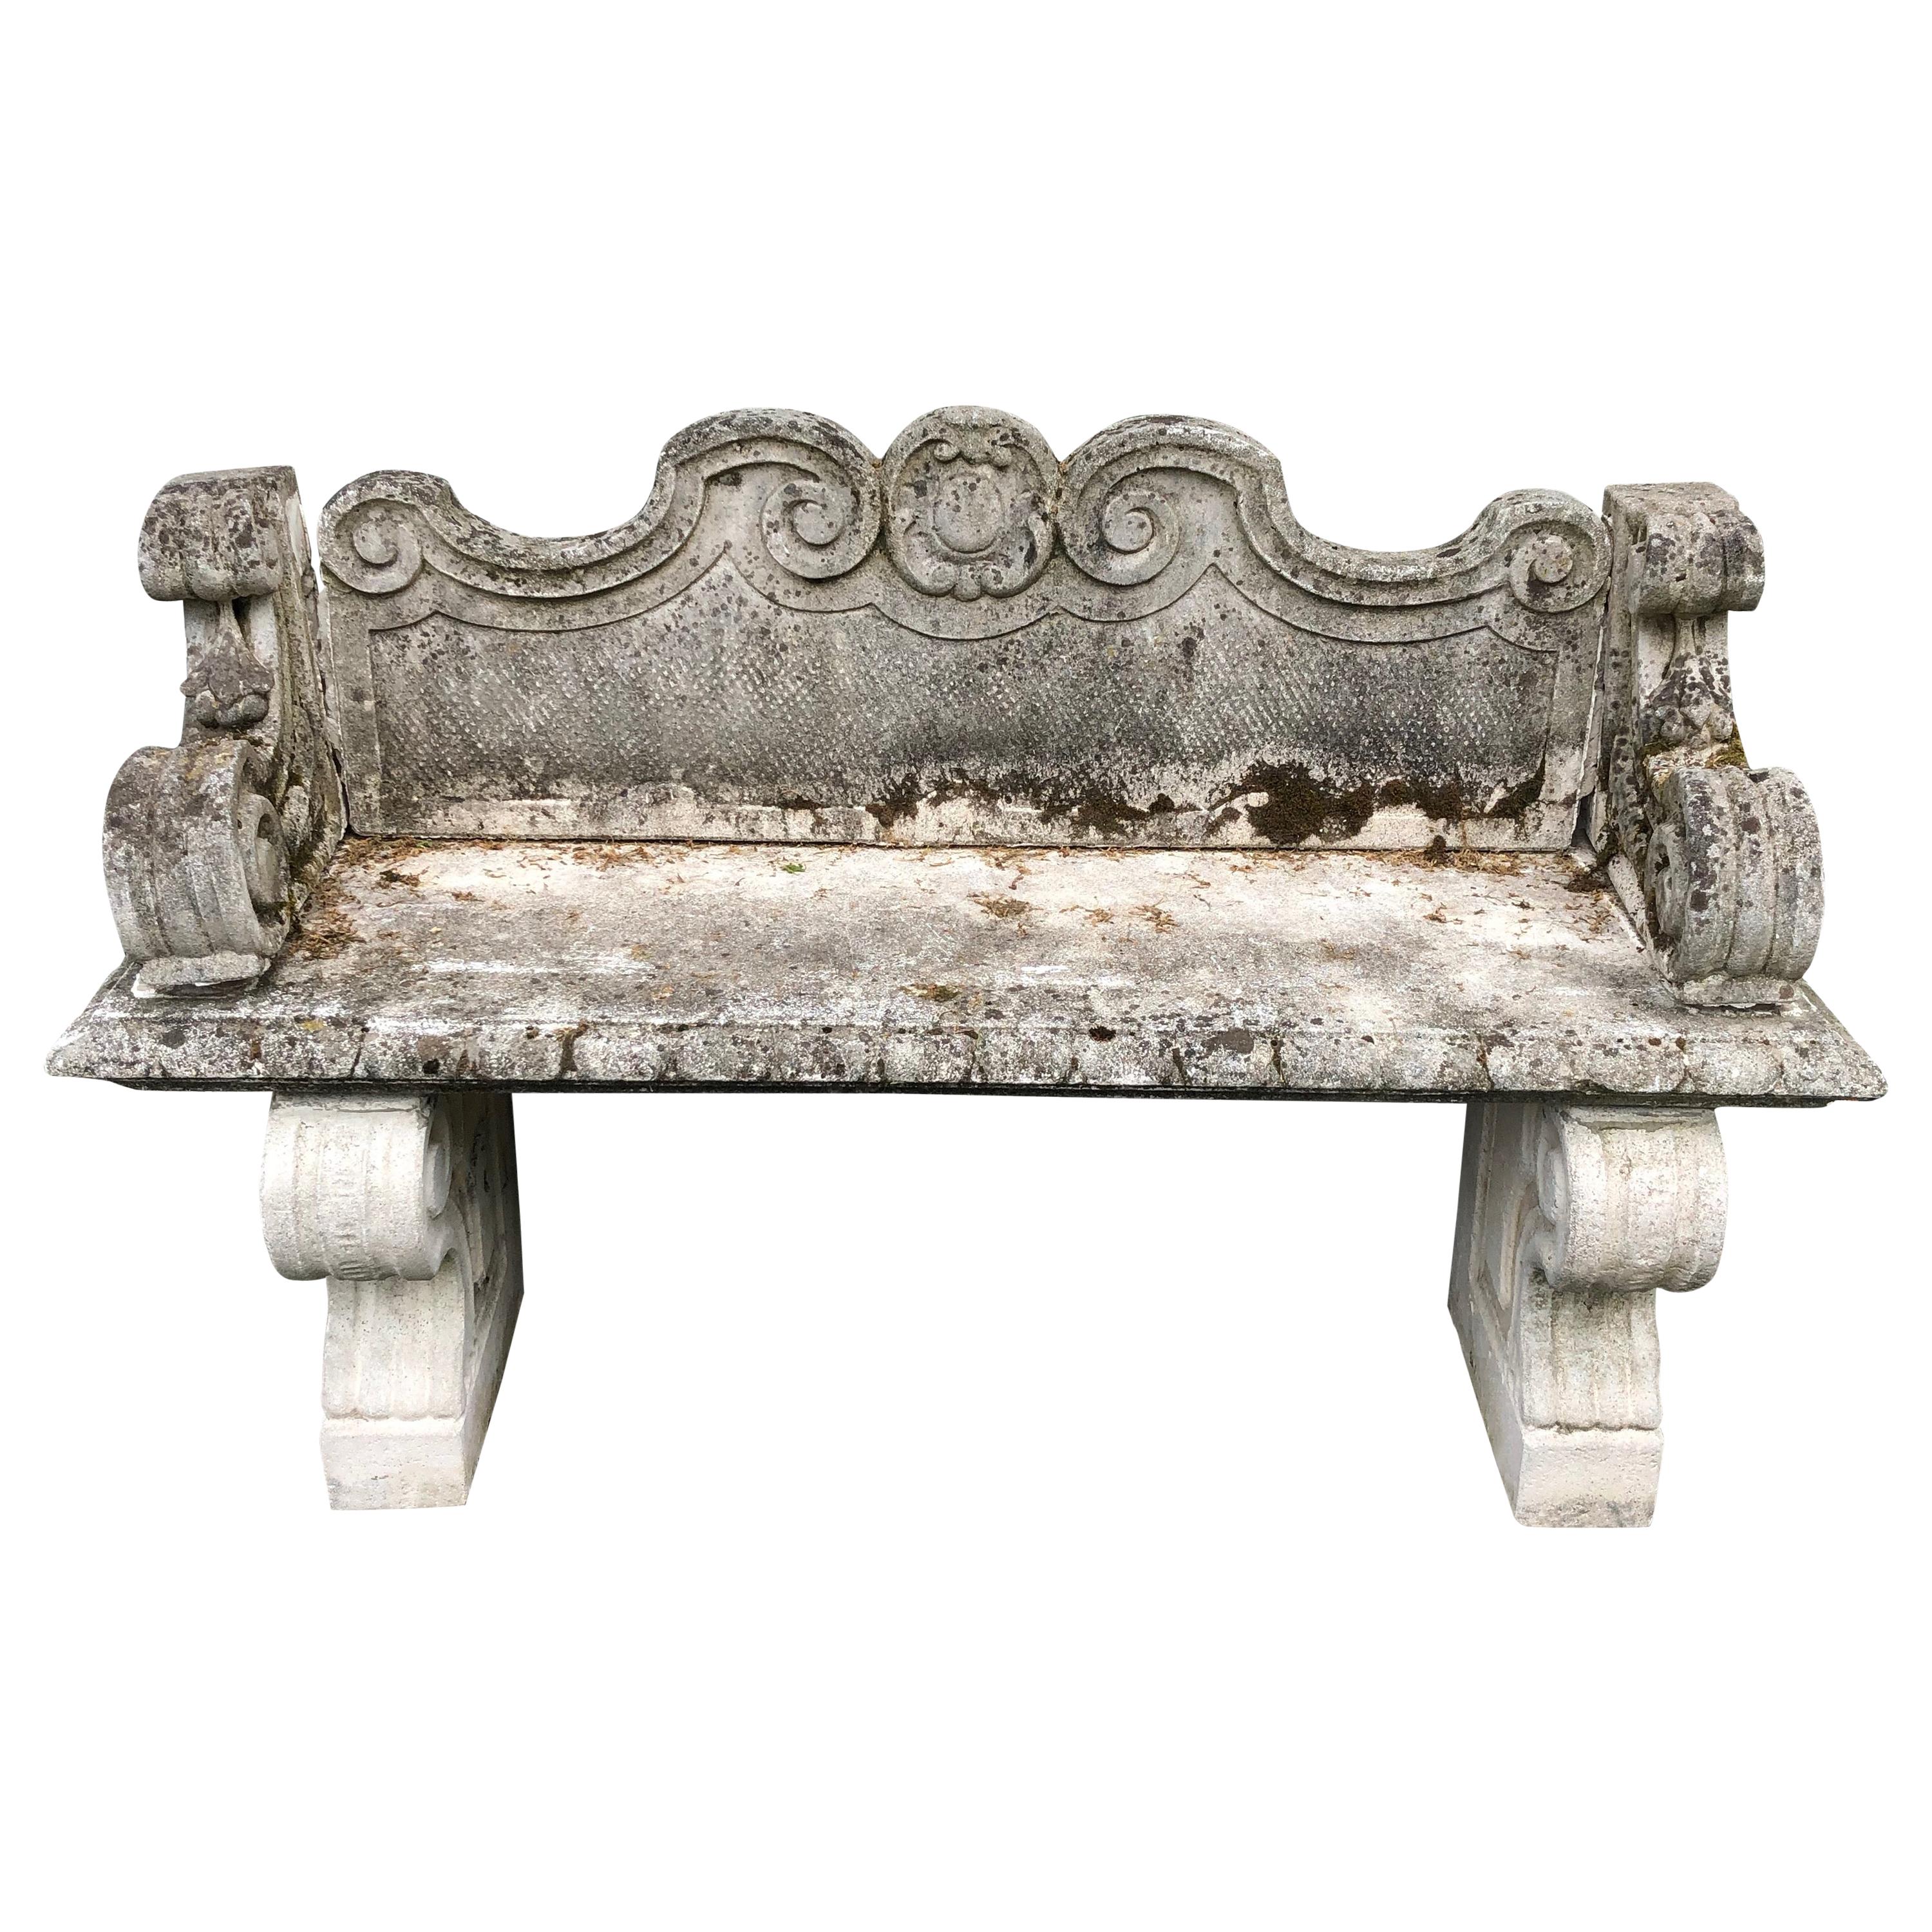 Italian Cast Marble Rococo High-Backed Bench with Arms